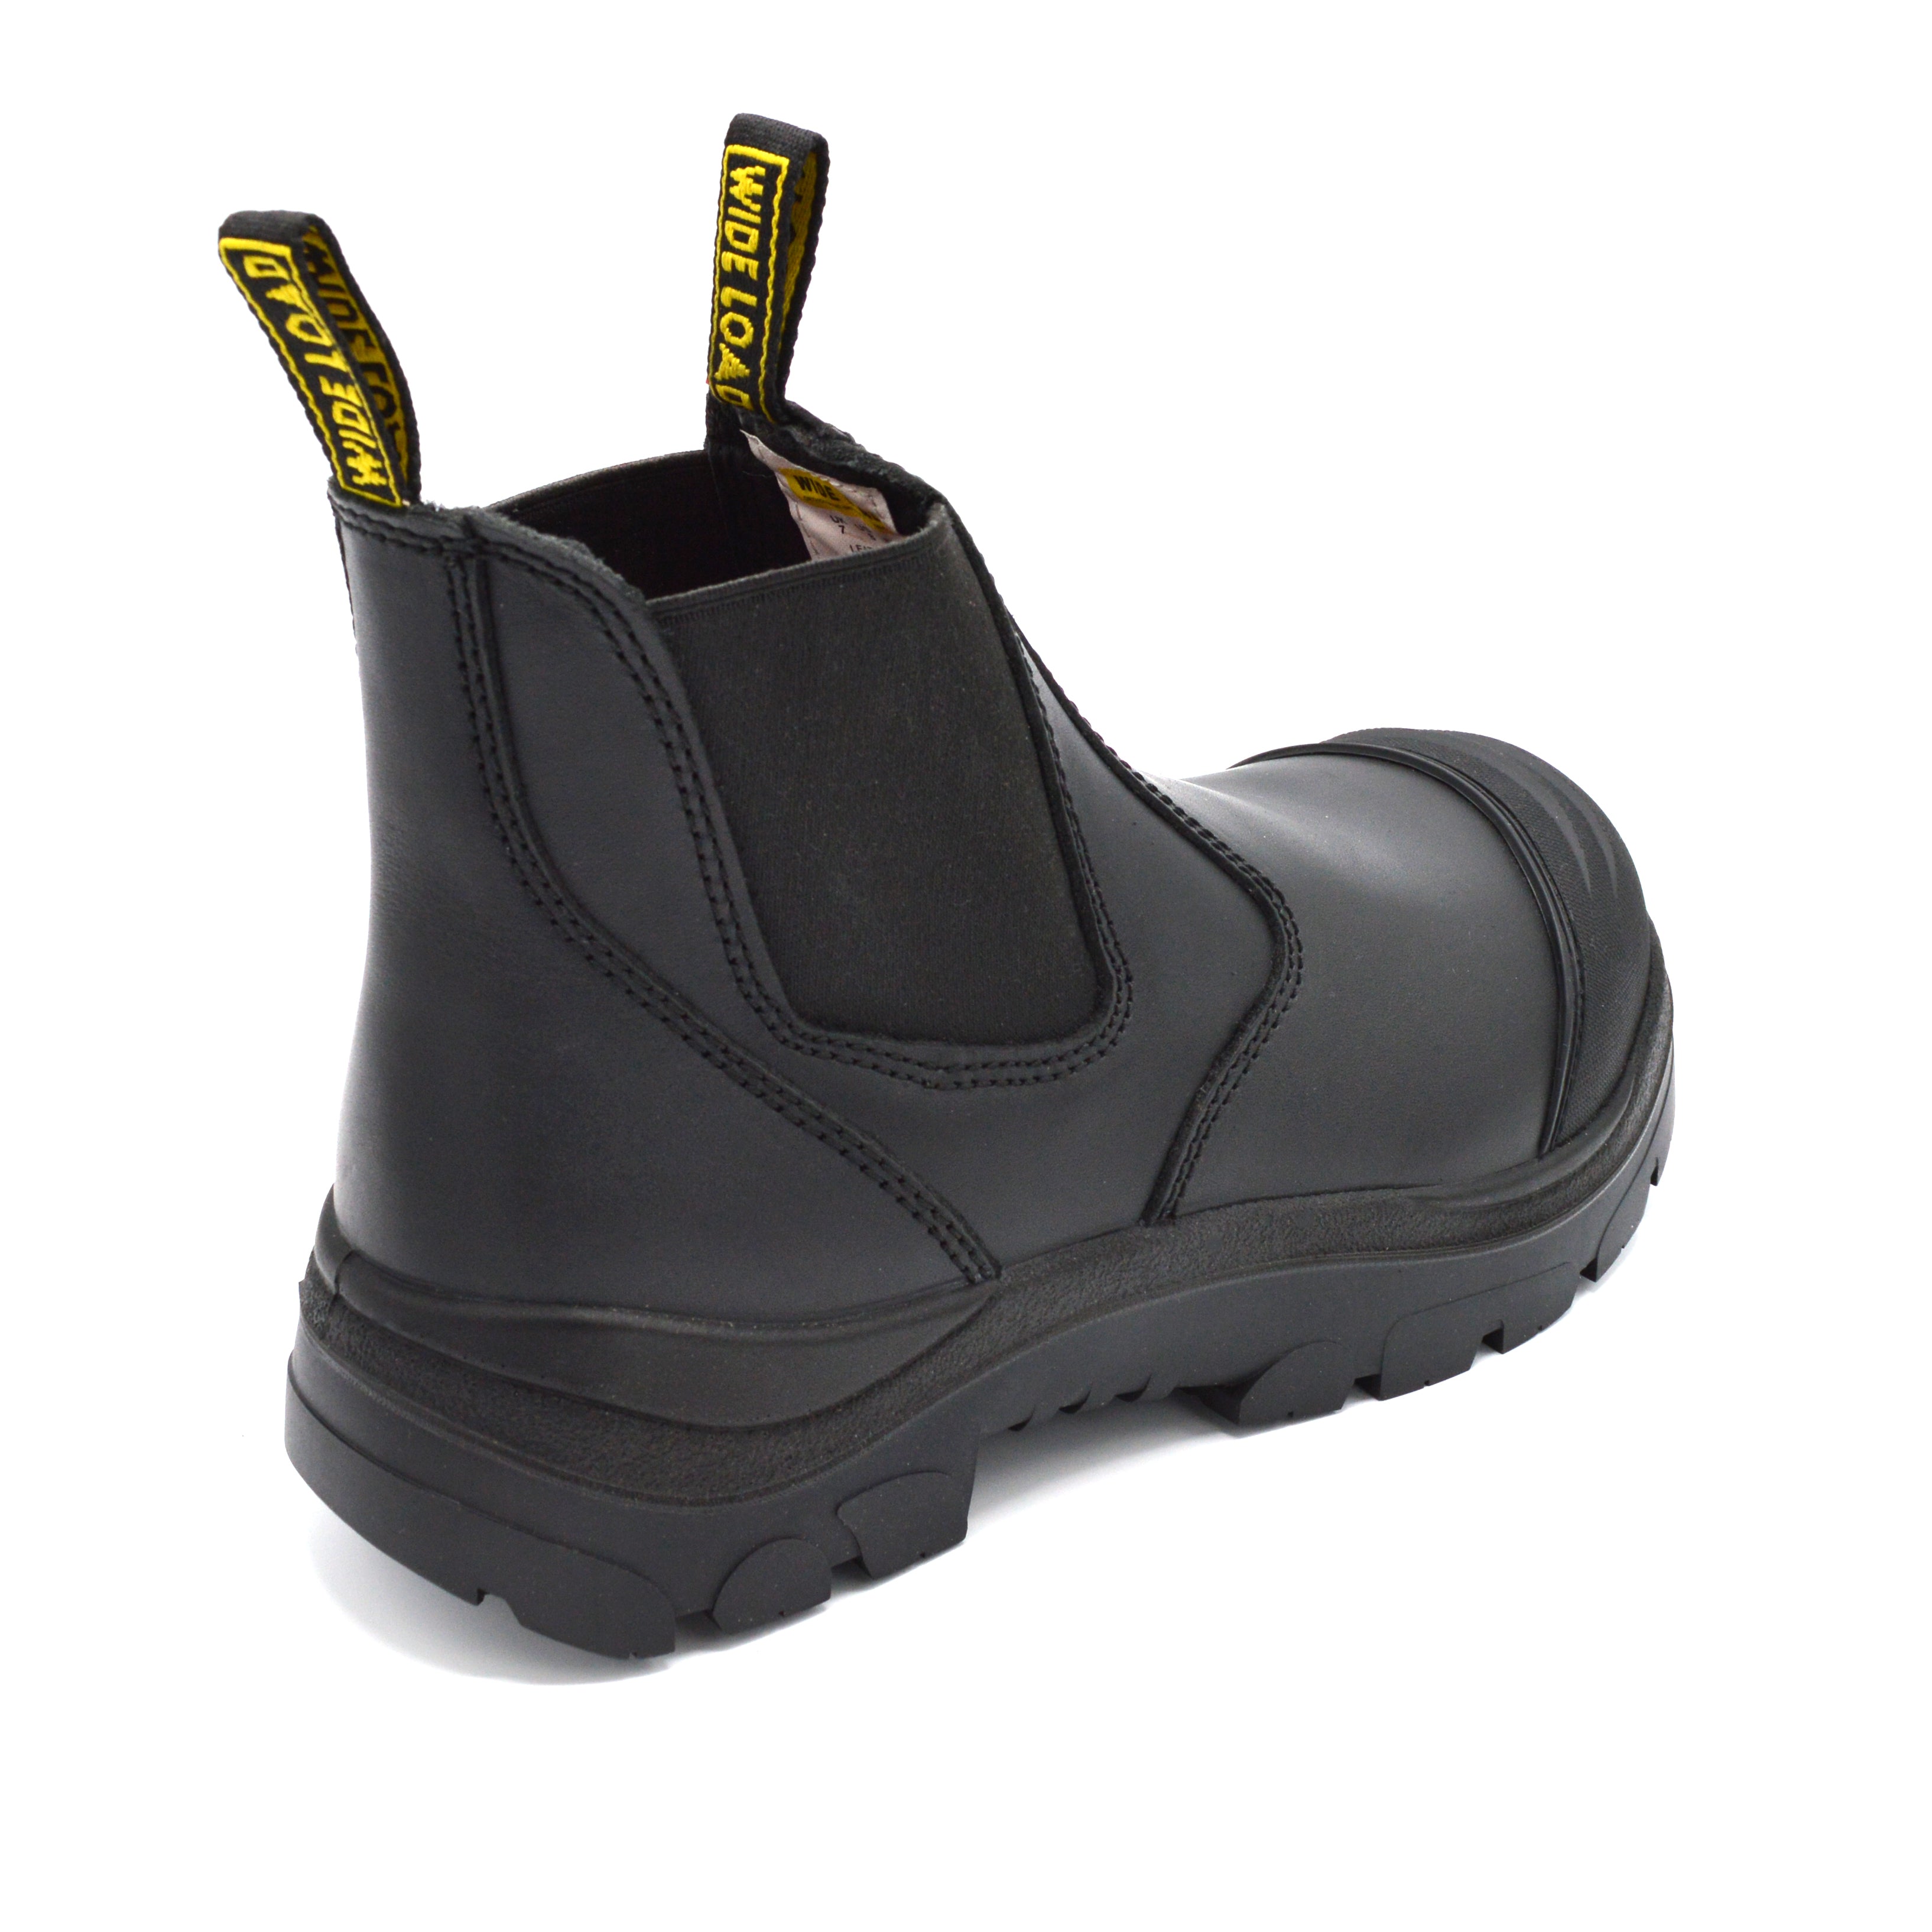 Men's Black Chelsea Safety Boot for Bunions